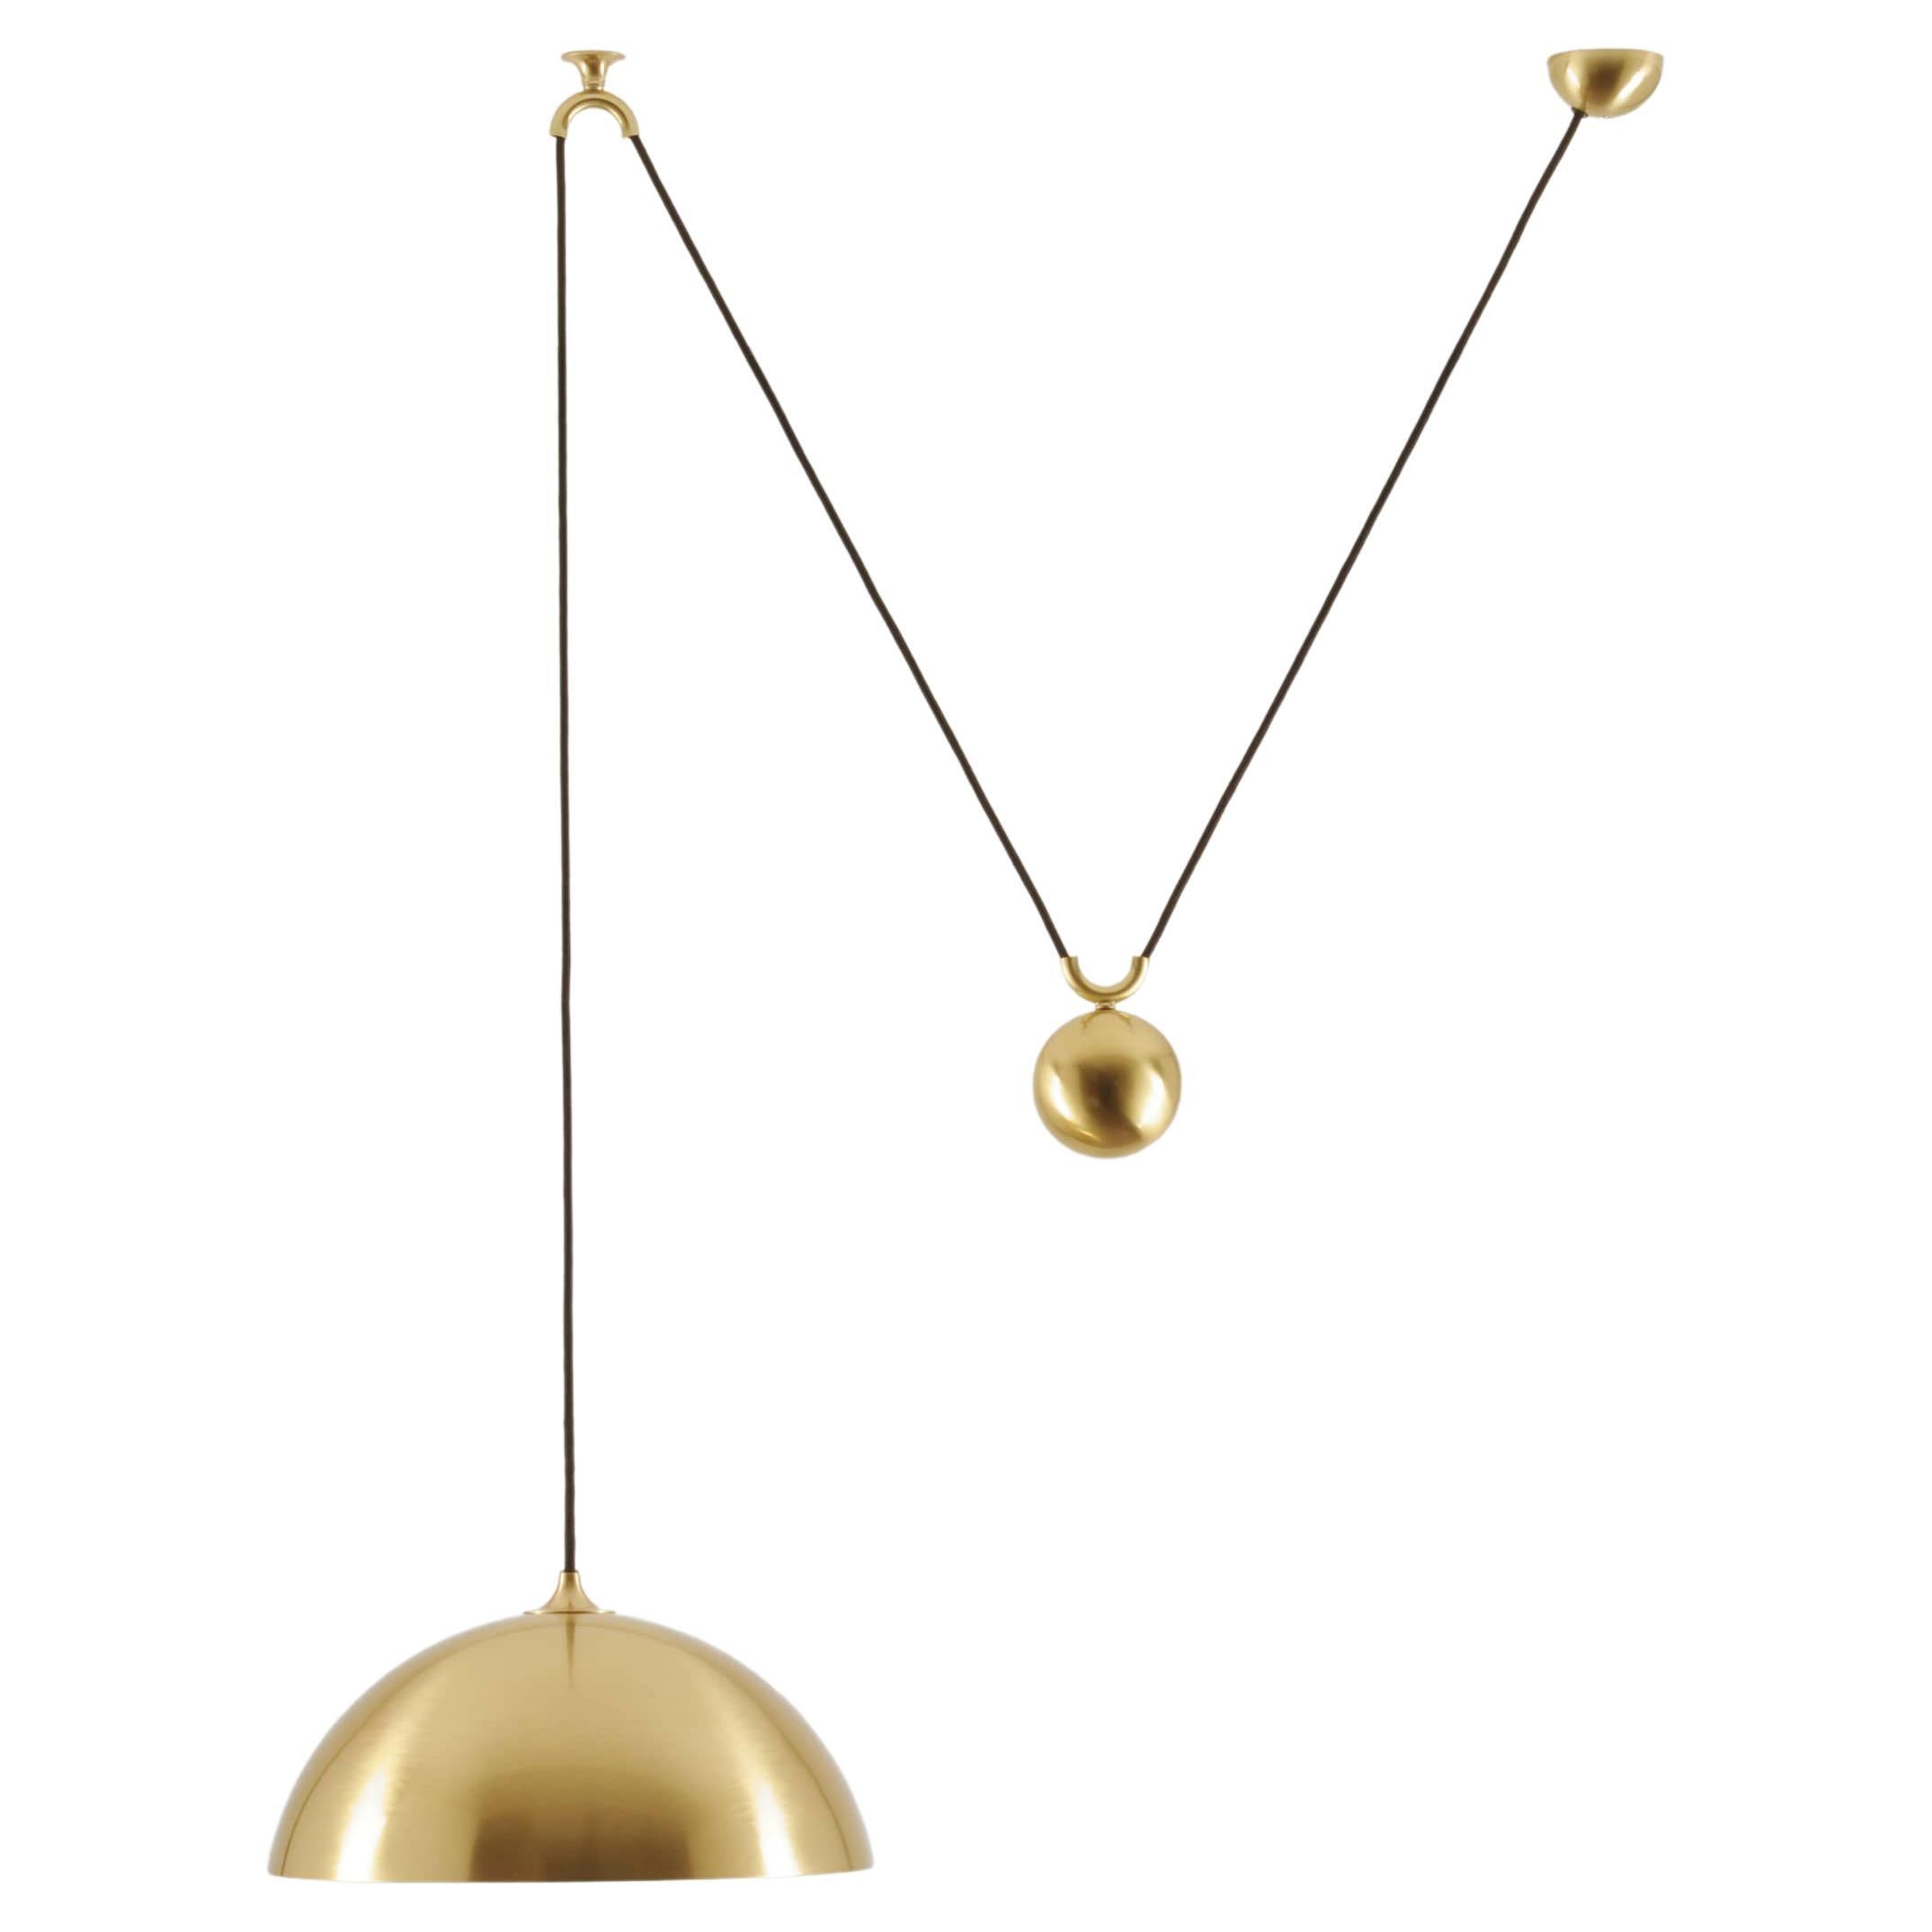 DUOS 36 Pendant Lamp with Side Pull in Brass by Florian Schulz, Germany